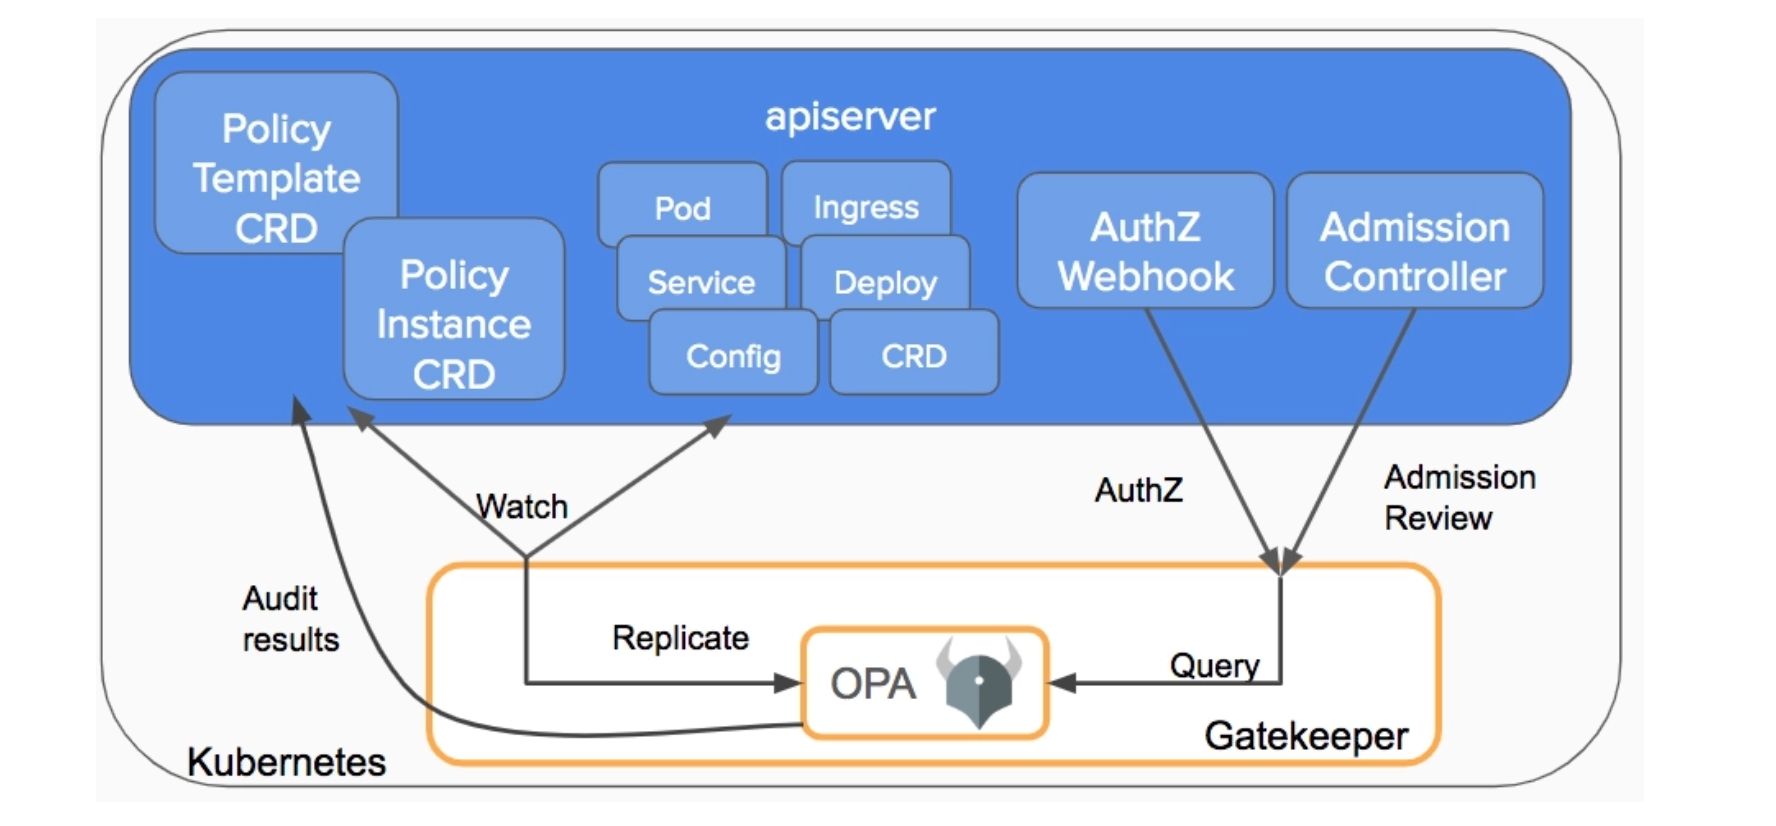 Architecture of OPA Gatekeeper and how it communicates with the Kubernetes apiserver